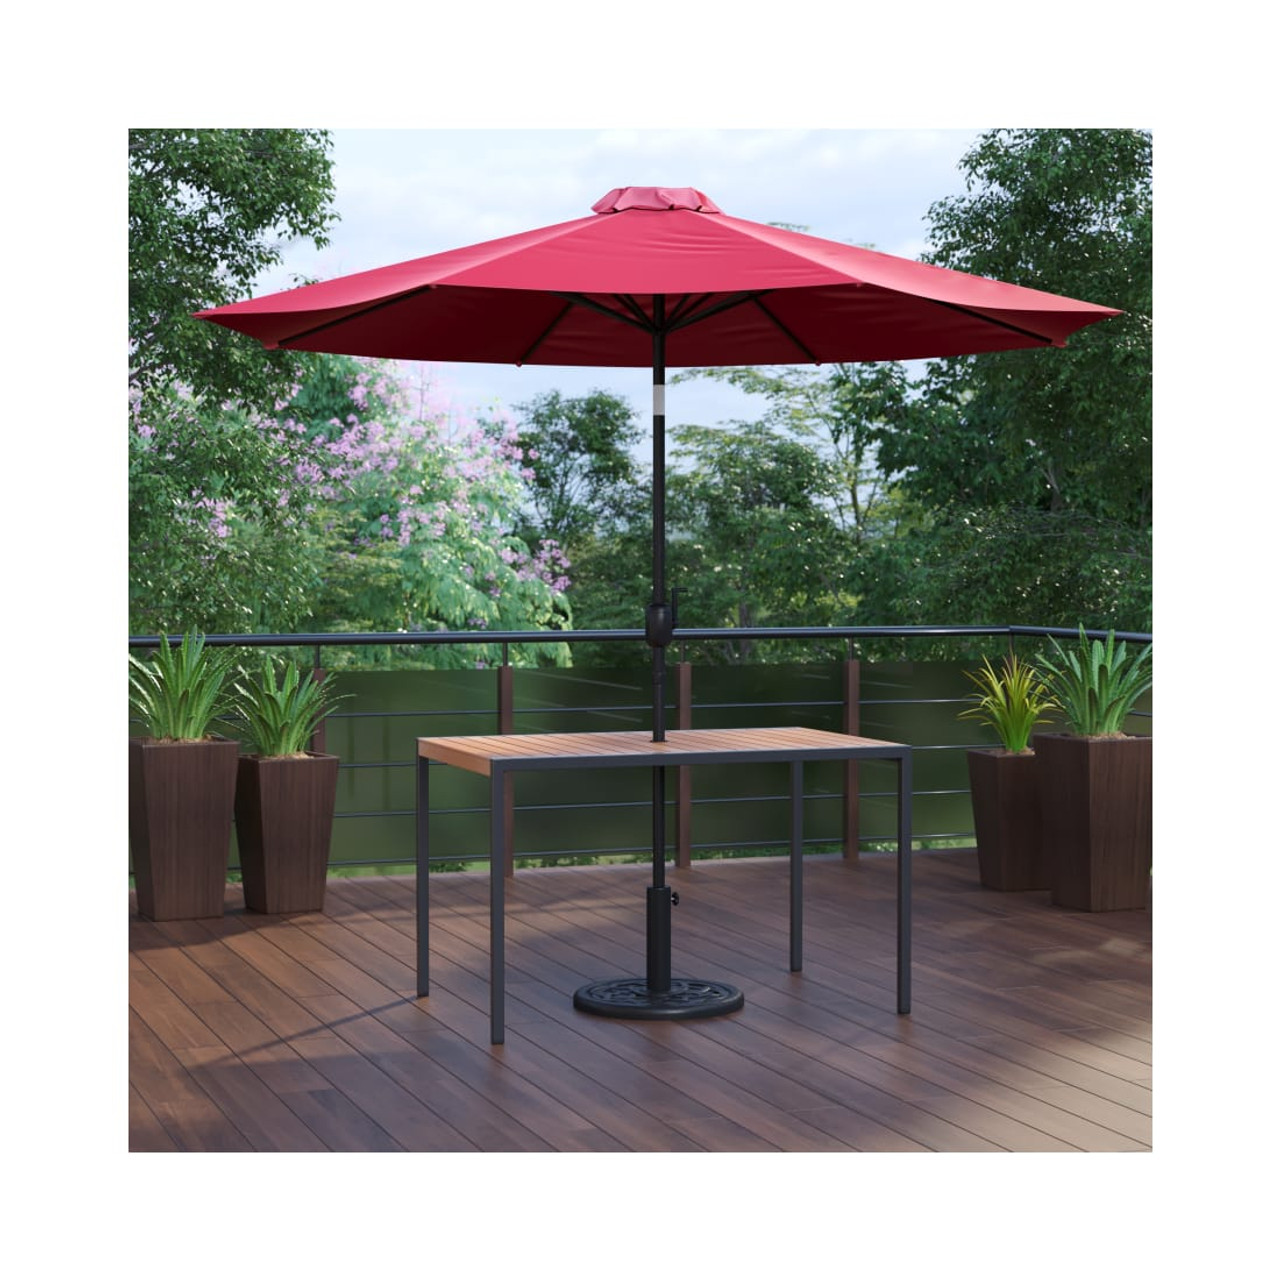 3 Piece Outdoor Patio Table Set 30” x 48” Synthetic Teak Patio Table with Red Umbrella and Base